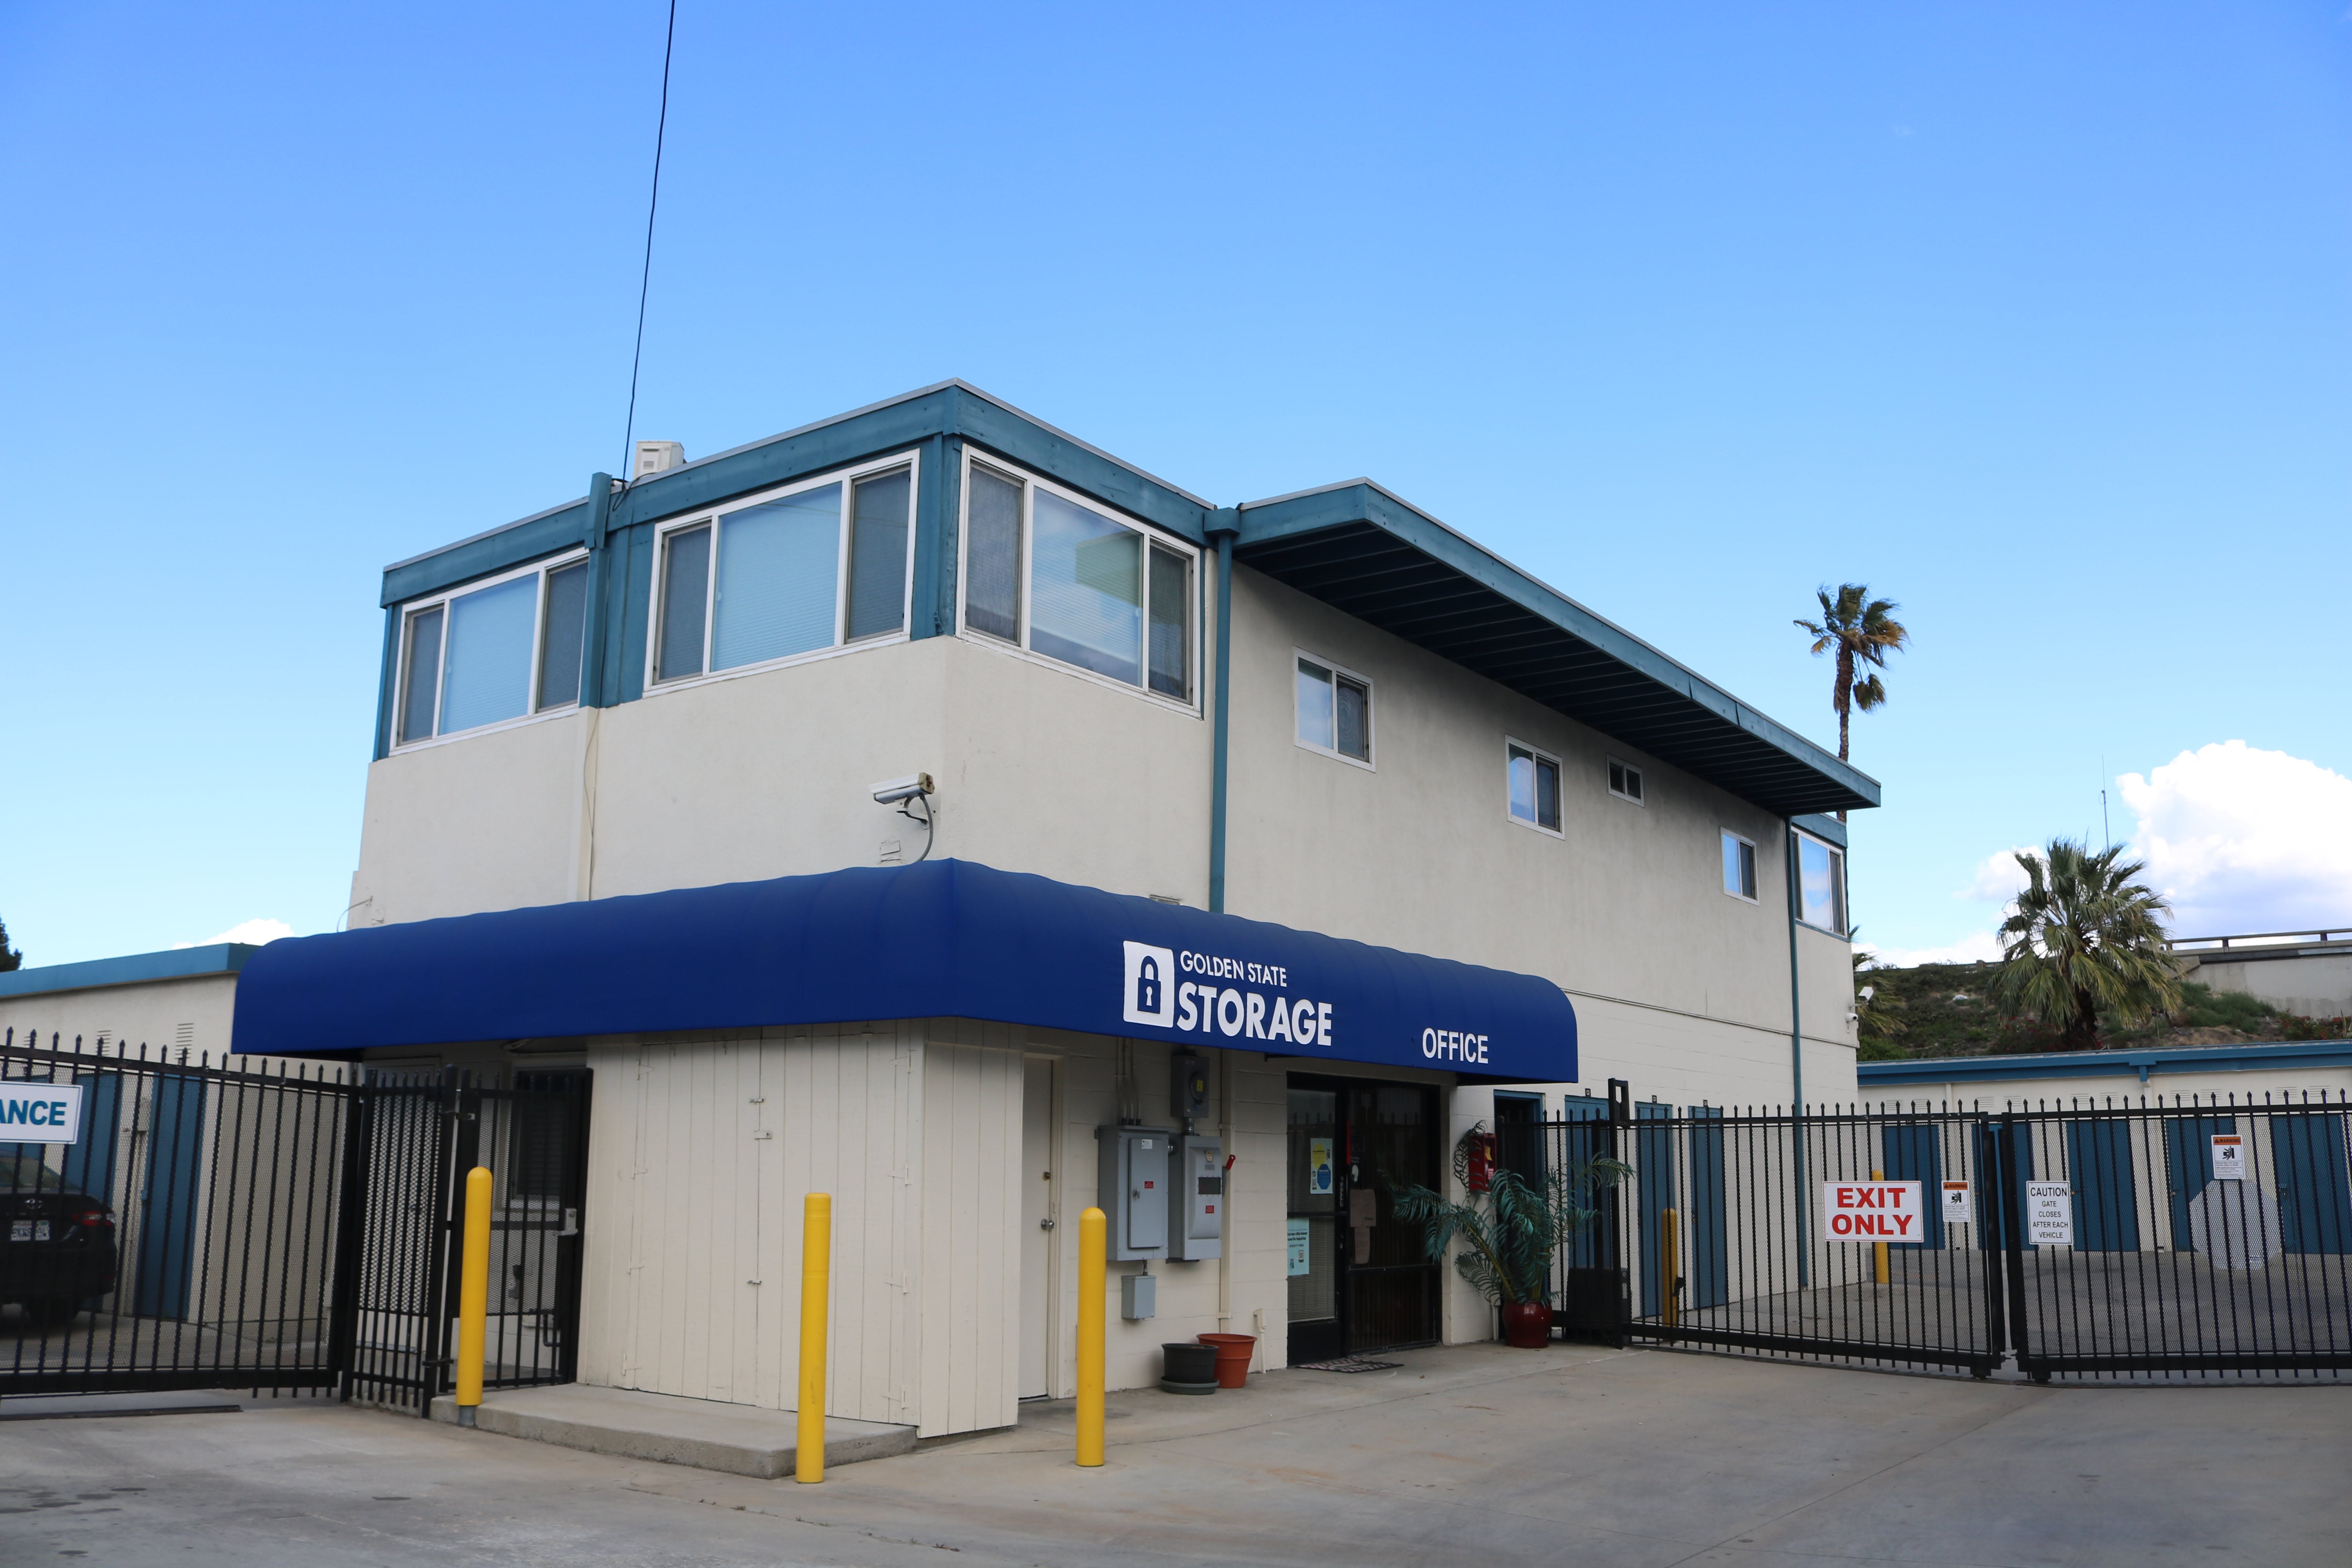 The front of the office building at Golden State Storage - Roscoe in North Hills, California